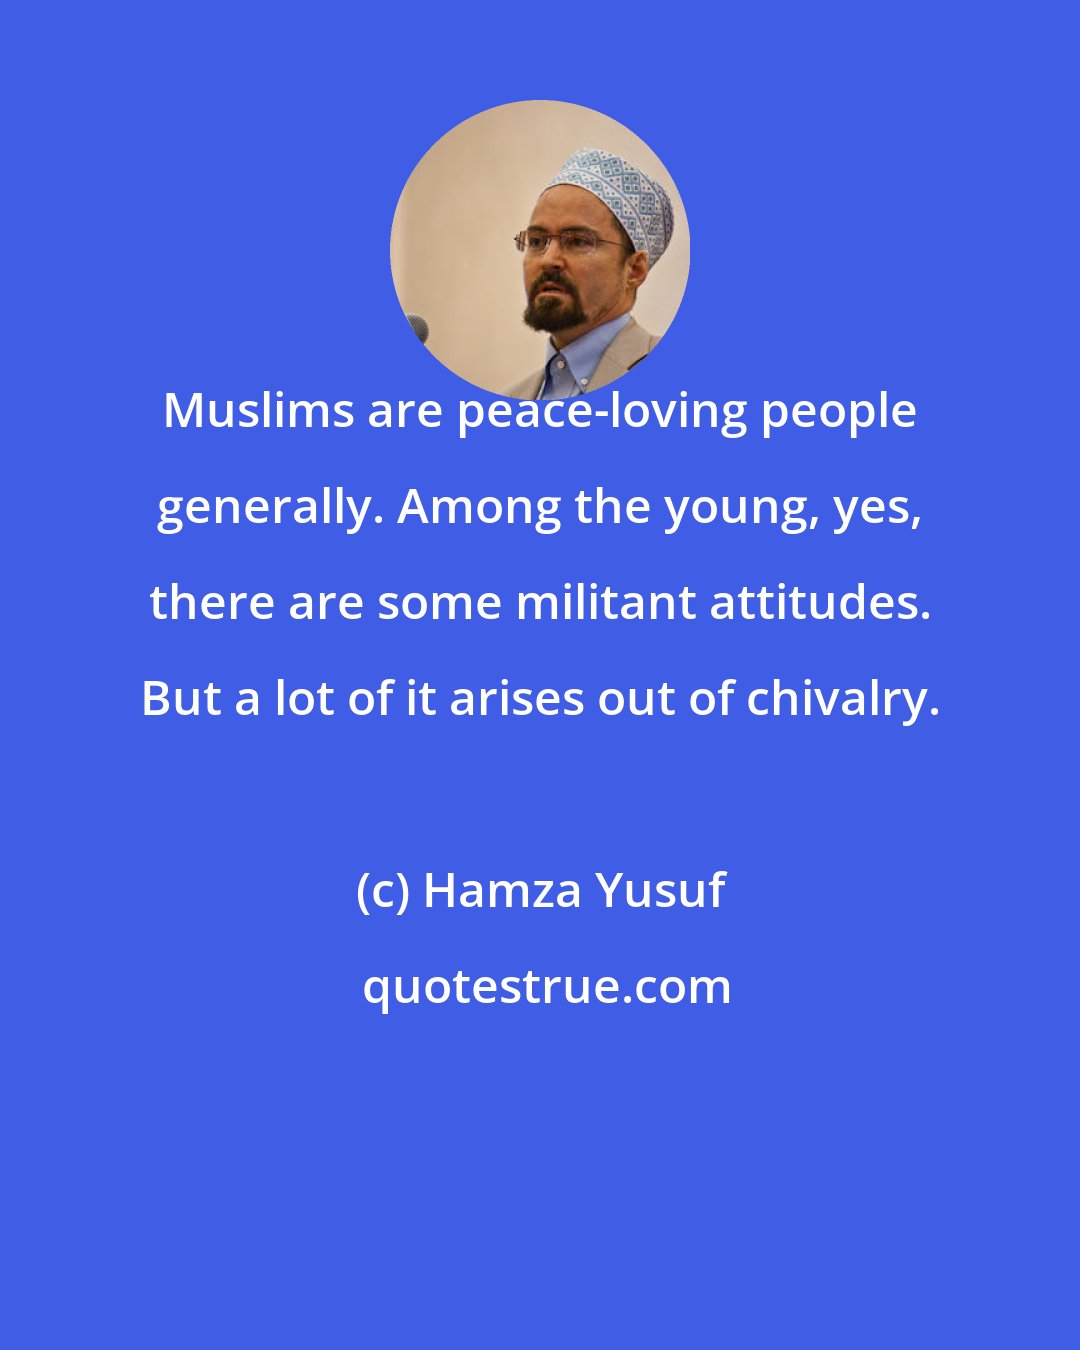 Hamza Yusuf: Muslims are peace-loving people generally. Among the young, yes, there are some militant attitudes. But a lot of it arises out of chivalry.